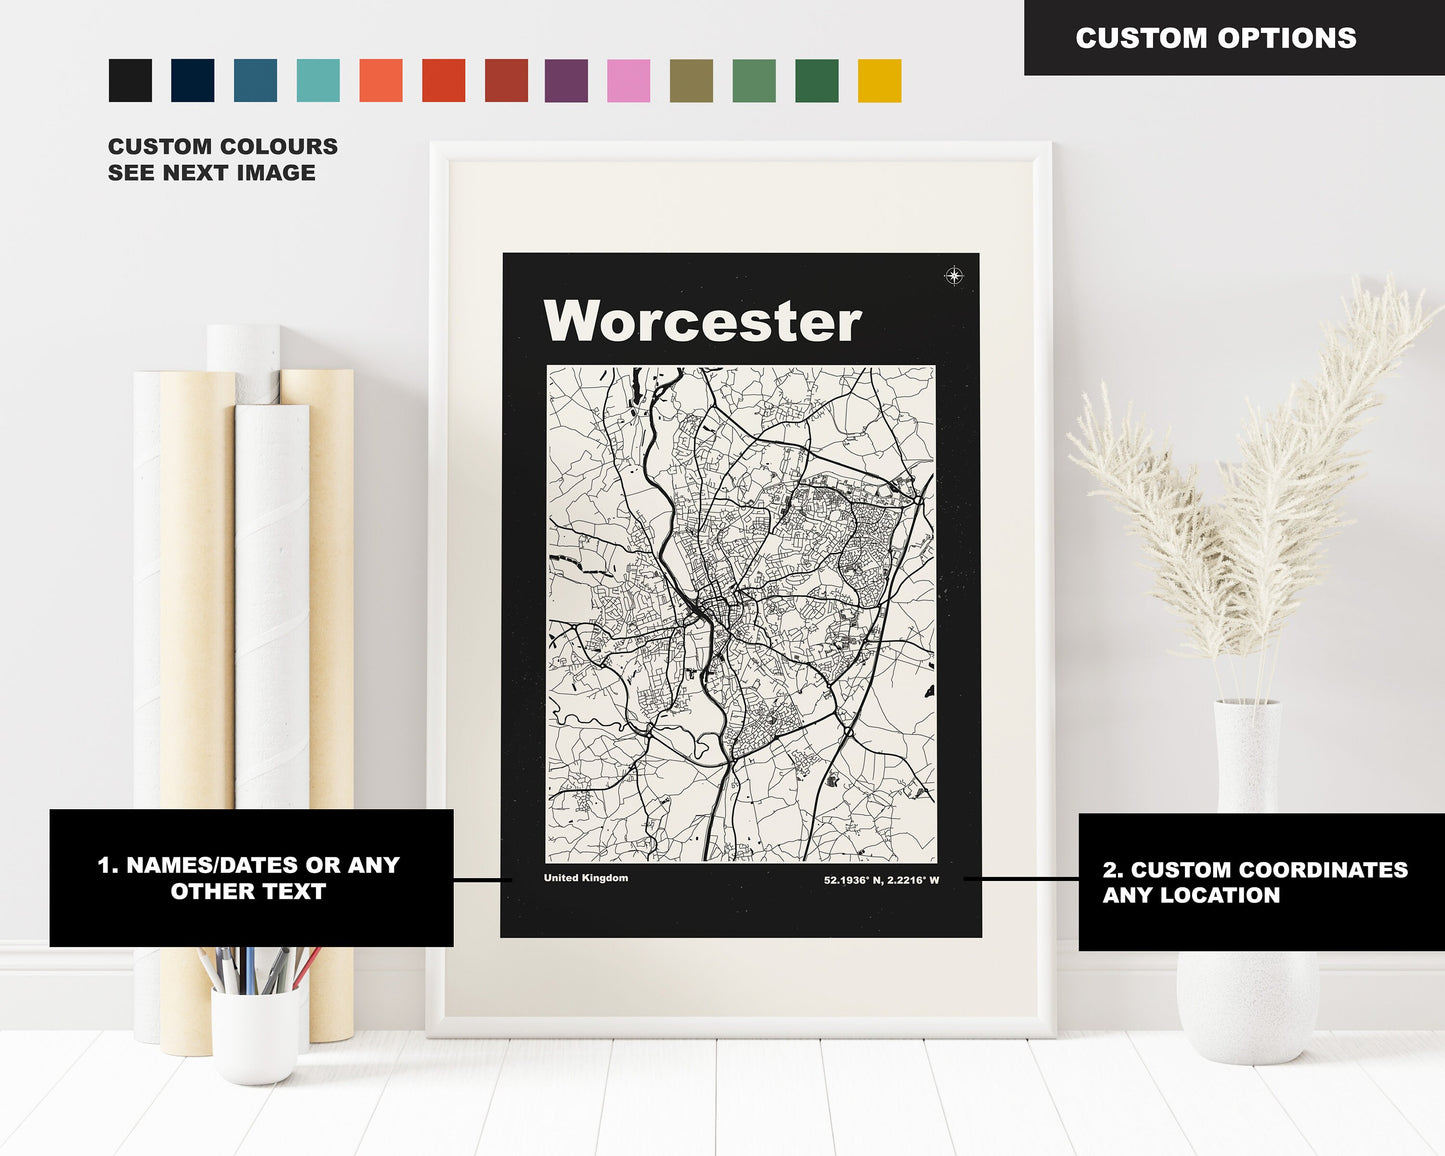 Worcester Print - Map Print - Mid Century Modern  - Retro - Vintage - Contemporary - Worcester Print - Map - Map Poster - Gift - Midlands